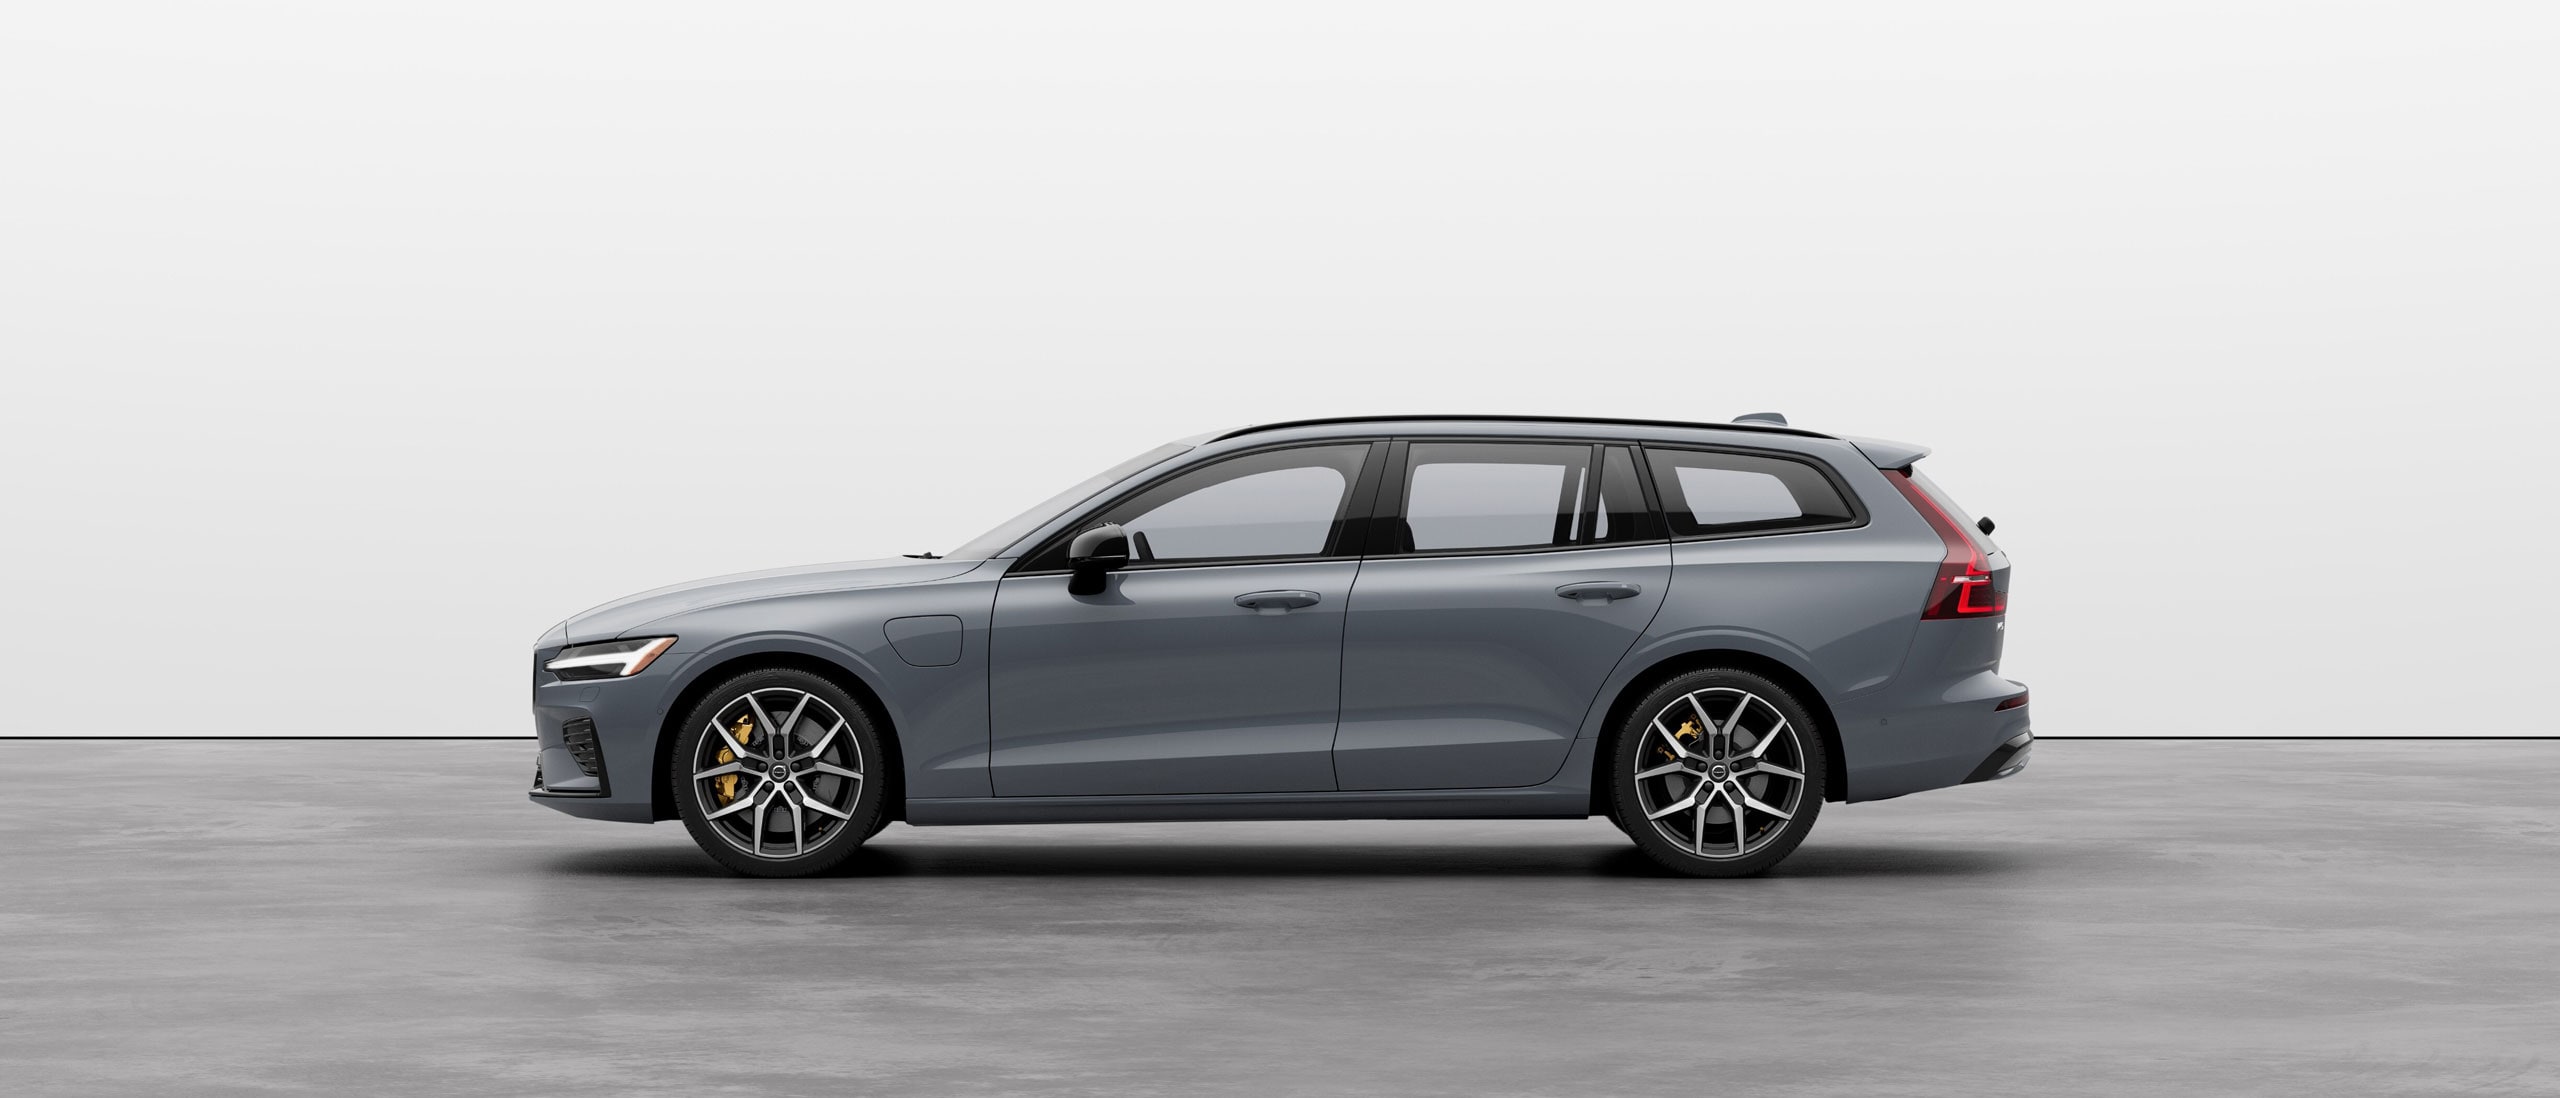 Meet our V60 Recharge plug-in hybrid wagon with Google built-in. Learn more.